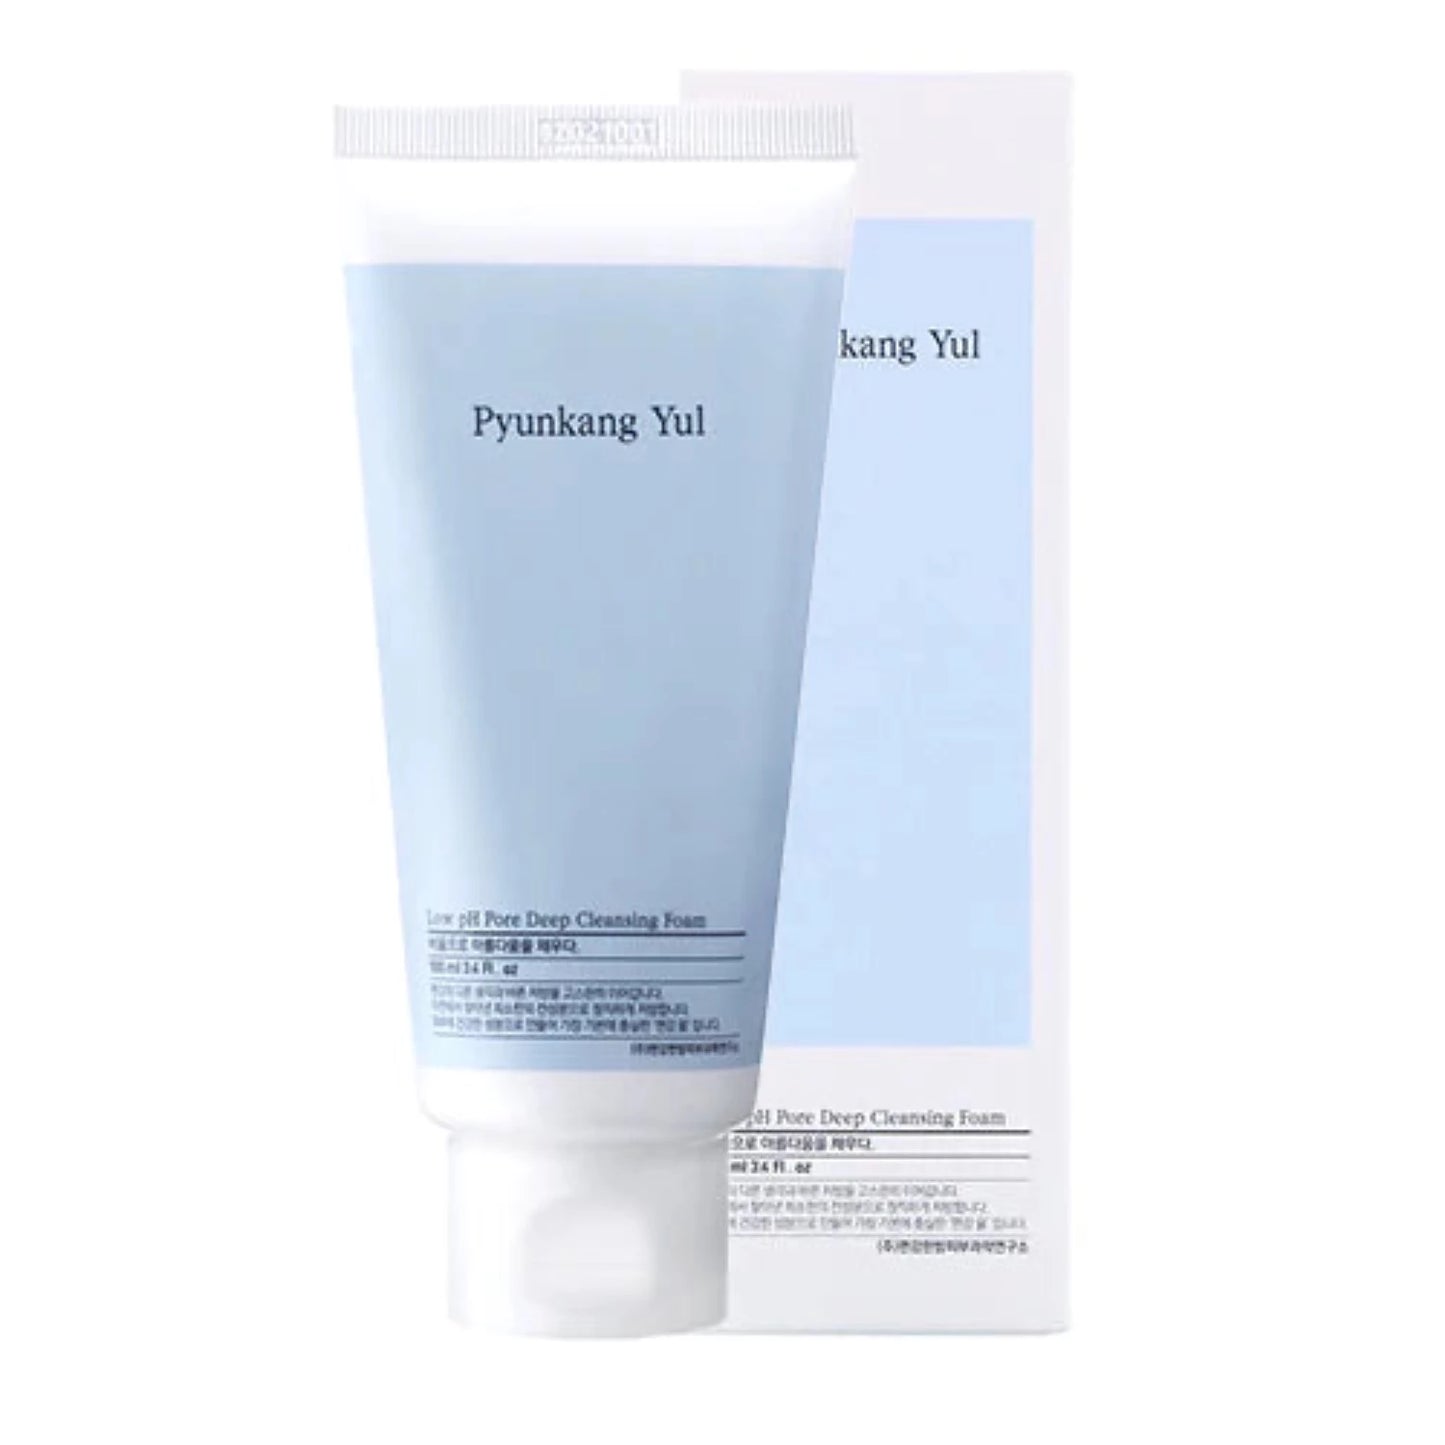 Pyunkang Yul Low pH Pore Deep Cleansing Foam is suitable for all skin types, providing deep cleansing without compromising the skin’s natural oils. This is an authentic Korean Beauty product 